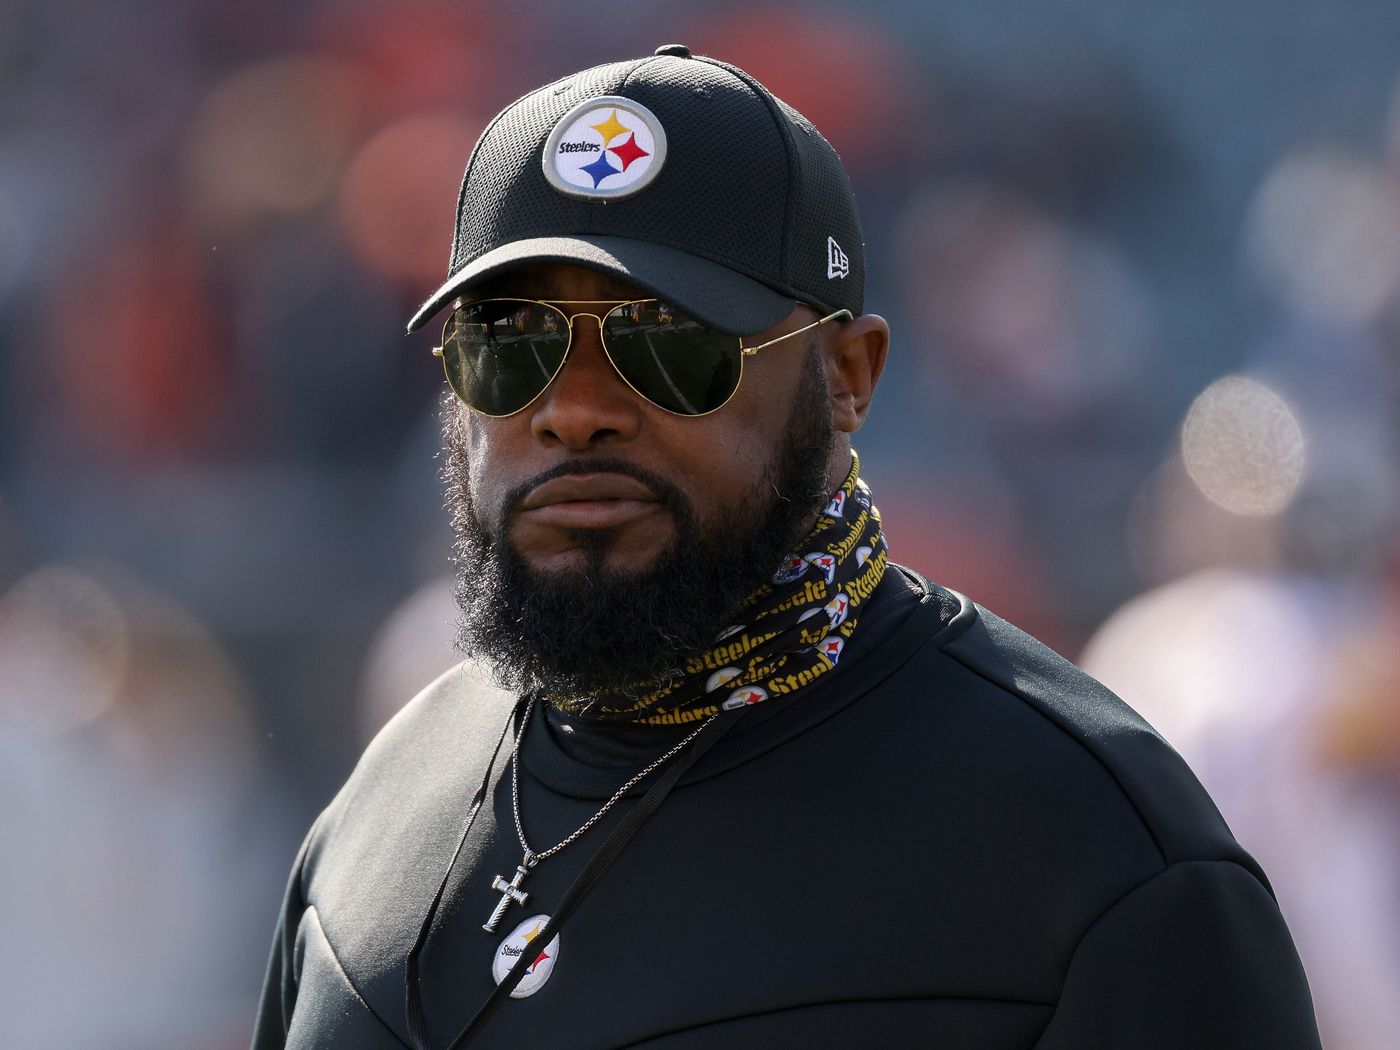 Mike Tomlin wearing a black shirt, cap, and sunglasses